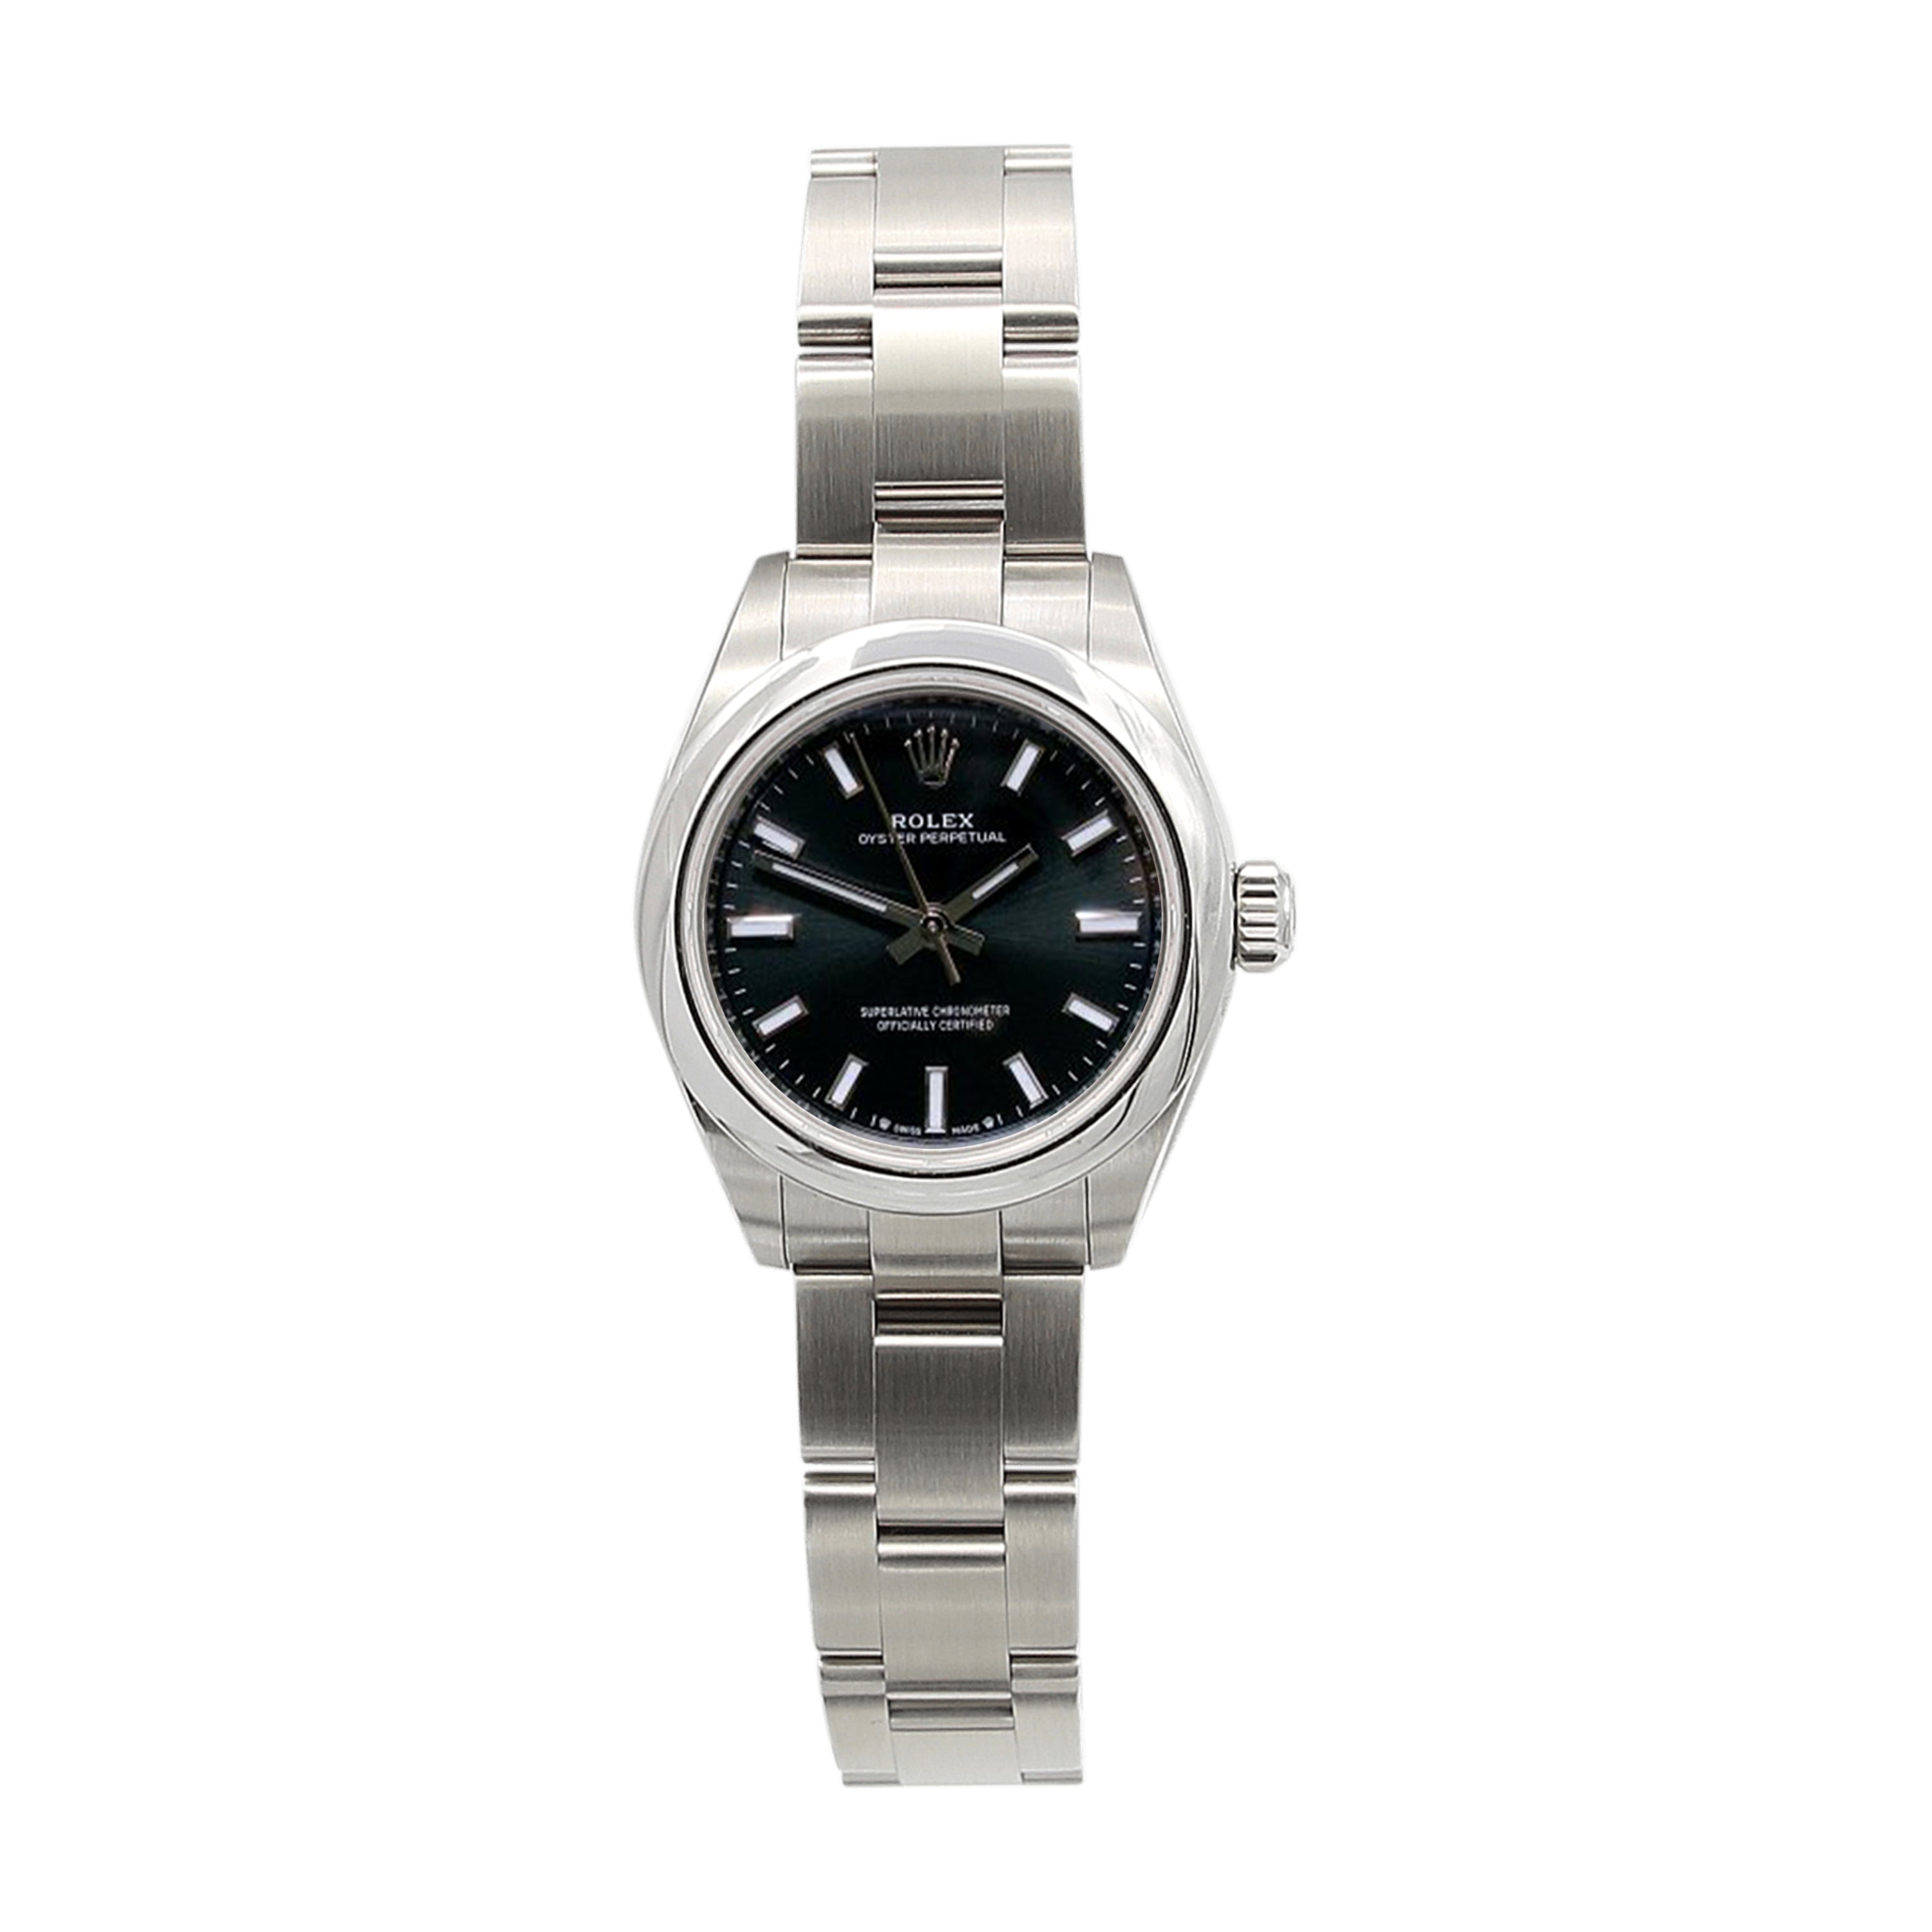 Rolex Oyster Perpetual ref. 276200 - Black Dial - Full Set